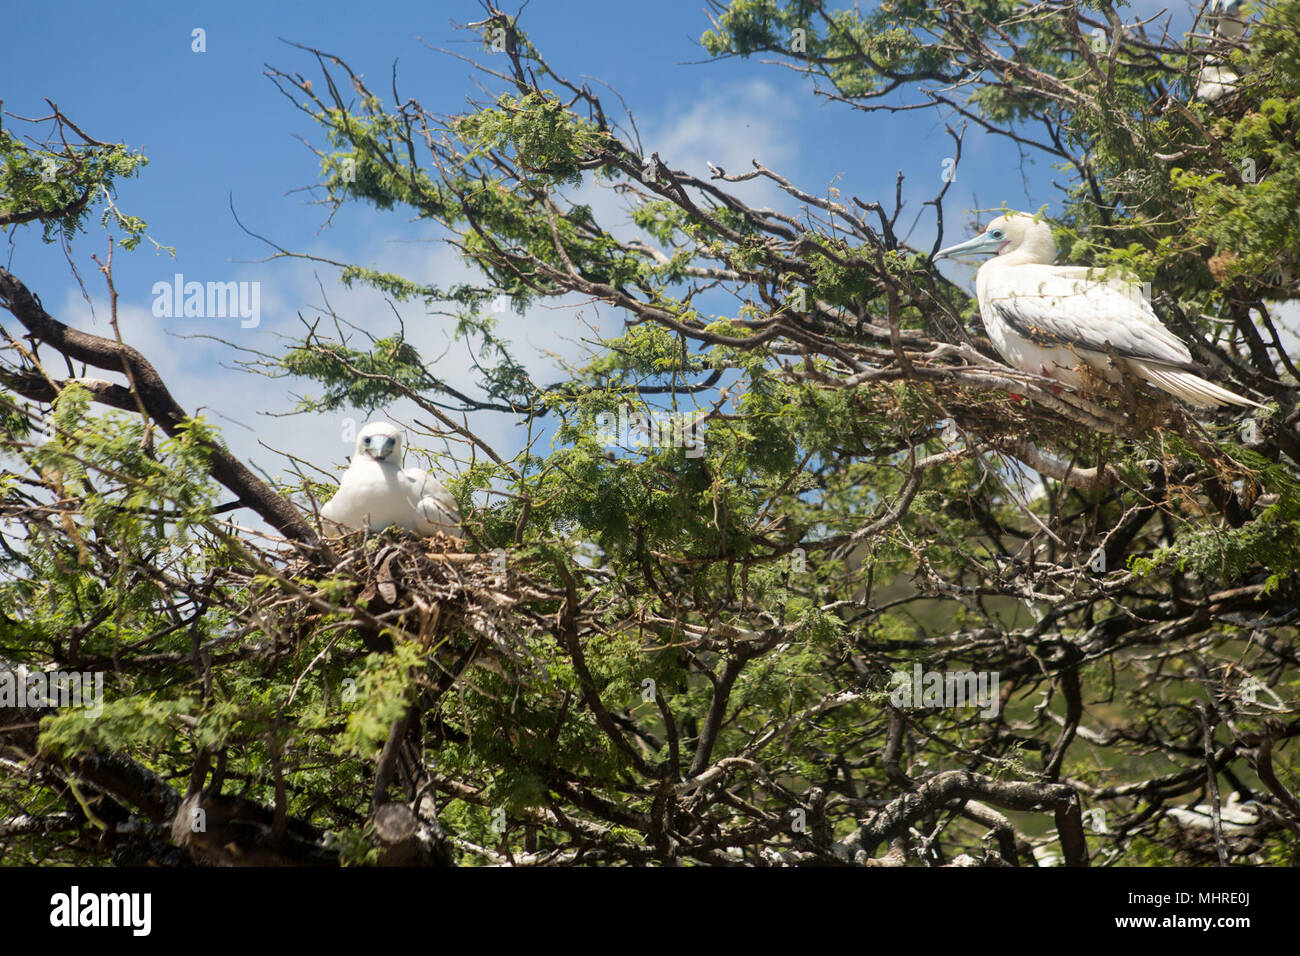 Booby birds lie in a tree on Ulupa’u Crater, Range Training Facility, Marine Corps Base Hawaii, March 15, 2018. Base environmental teamed with Pacific Rim Conservation, U.S. Fish and Wildlife Service, and Oikonos in an attempt to relocate Red-footed Booby seabirds. Decoys and speakers are being placed in trees away from the firing area so that U.S. Marines will be able to train, produce readiness, and minimize impact to this federally protected species. (U.S. Marine Corps Stock Photo